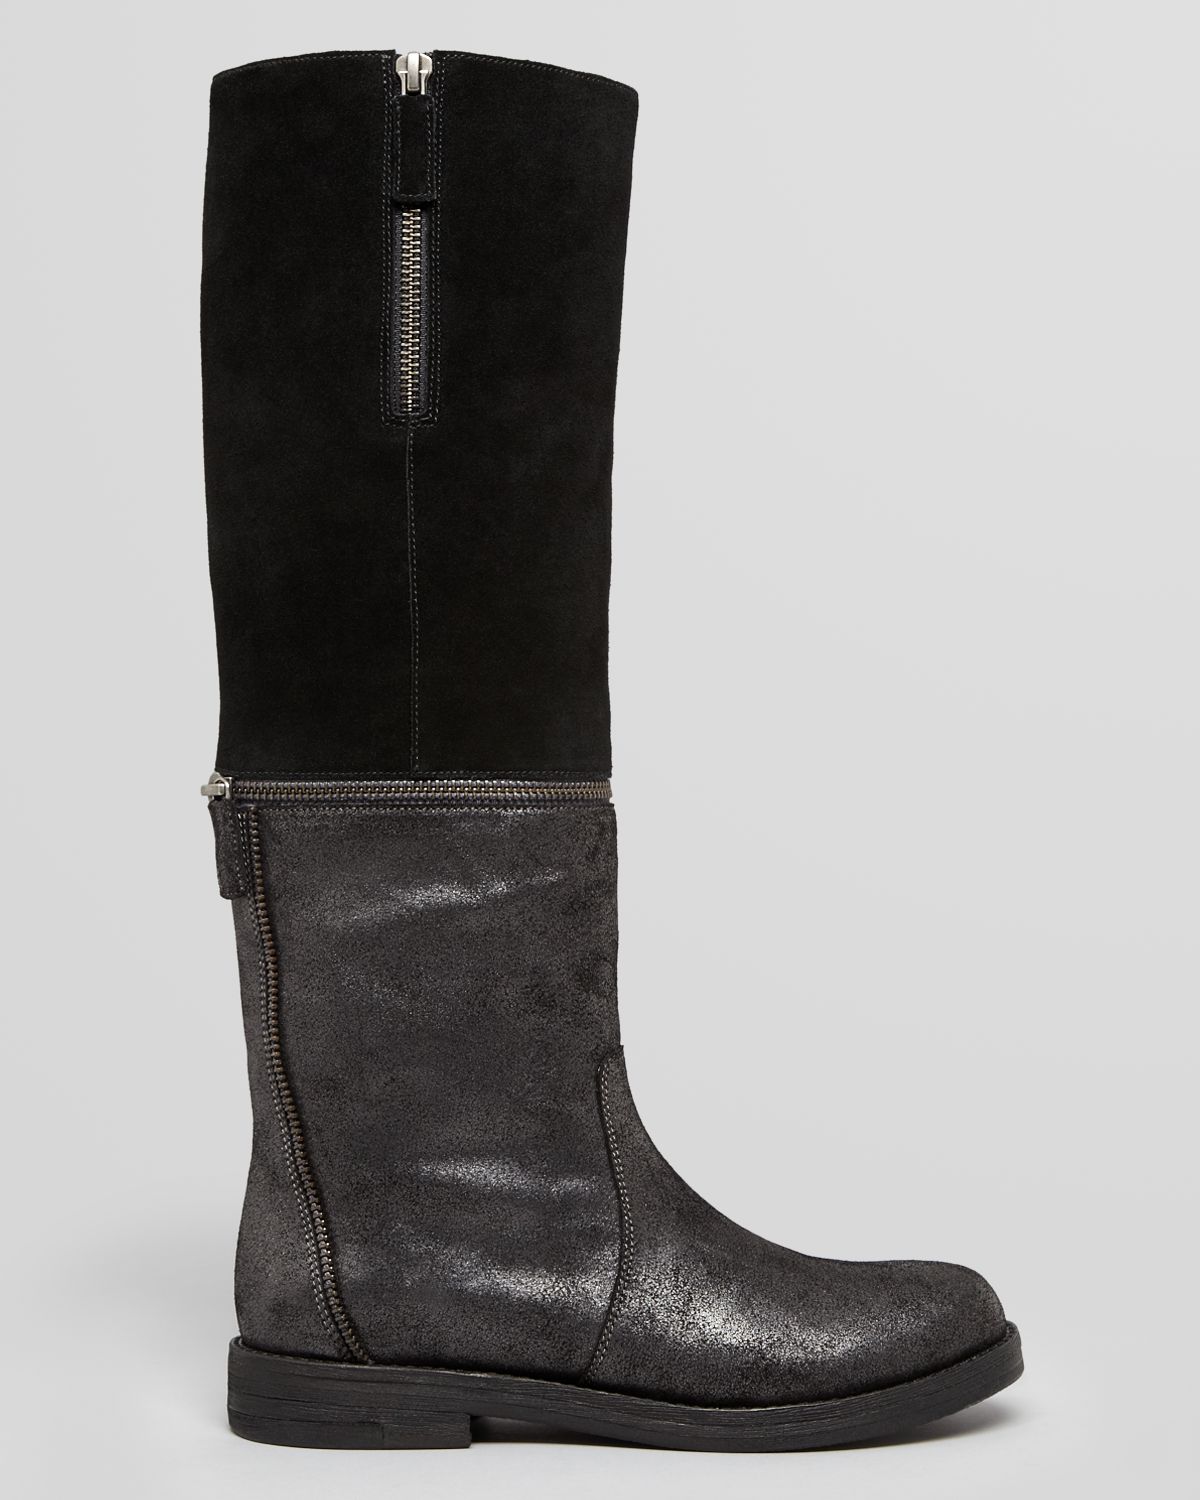 Eileen Fisher Boots Switch Convertible in Black Lyst